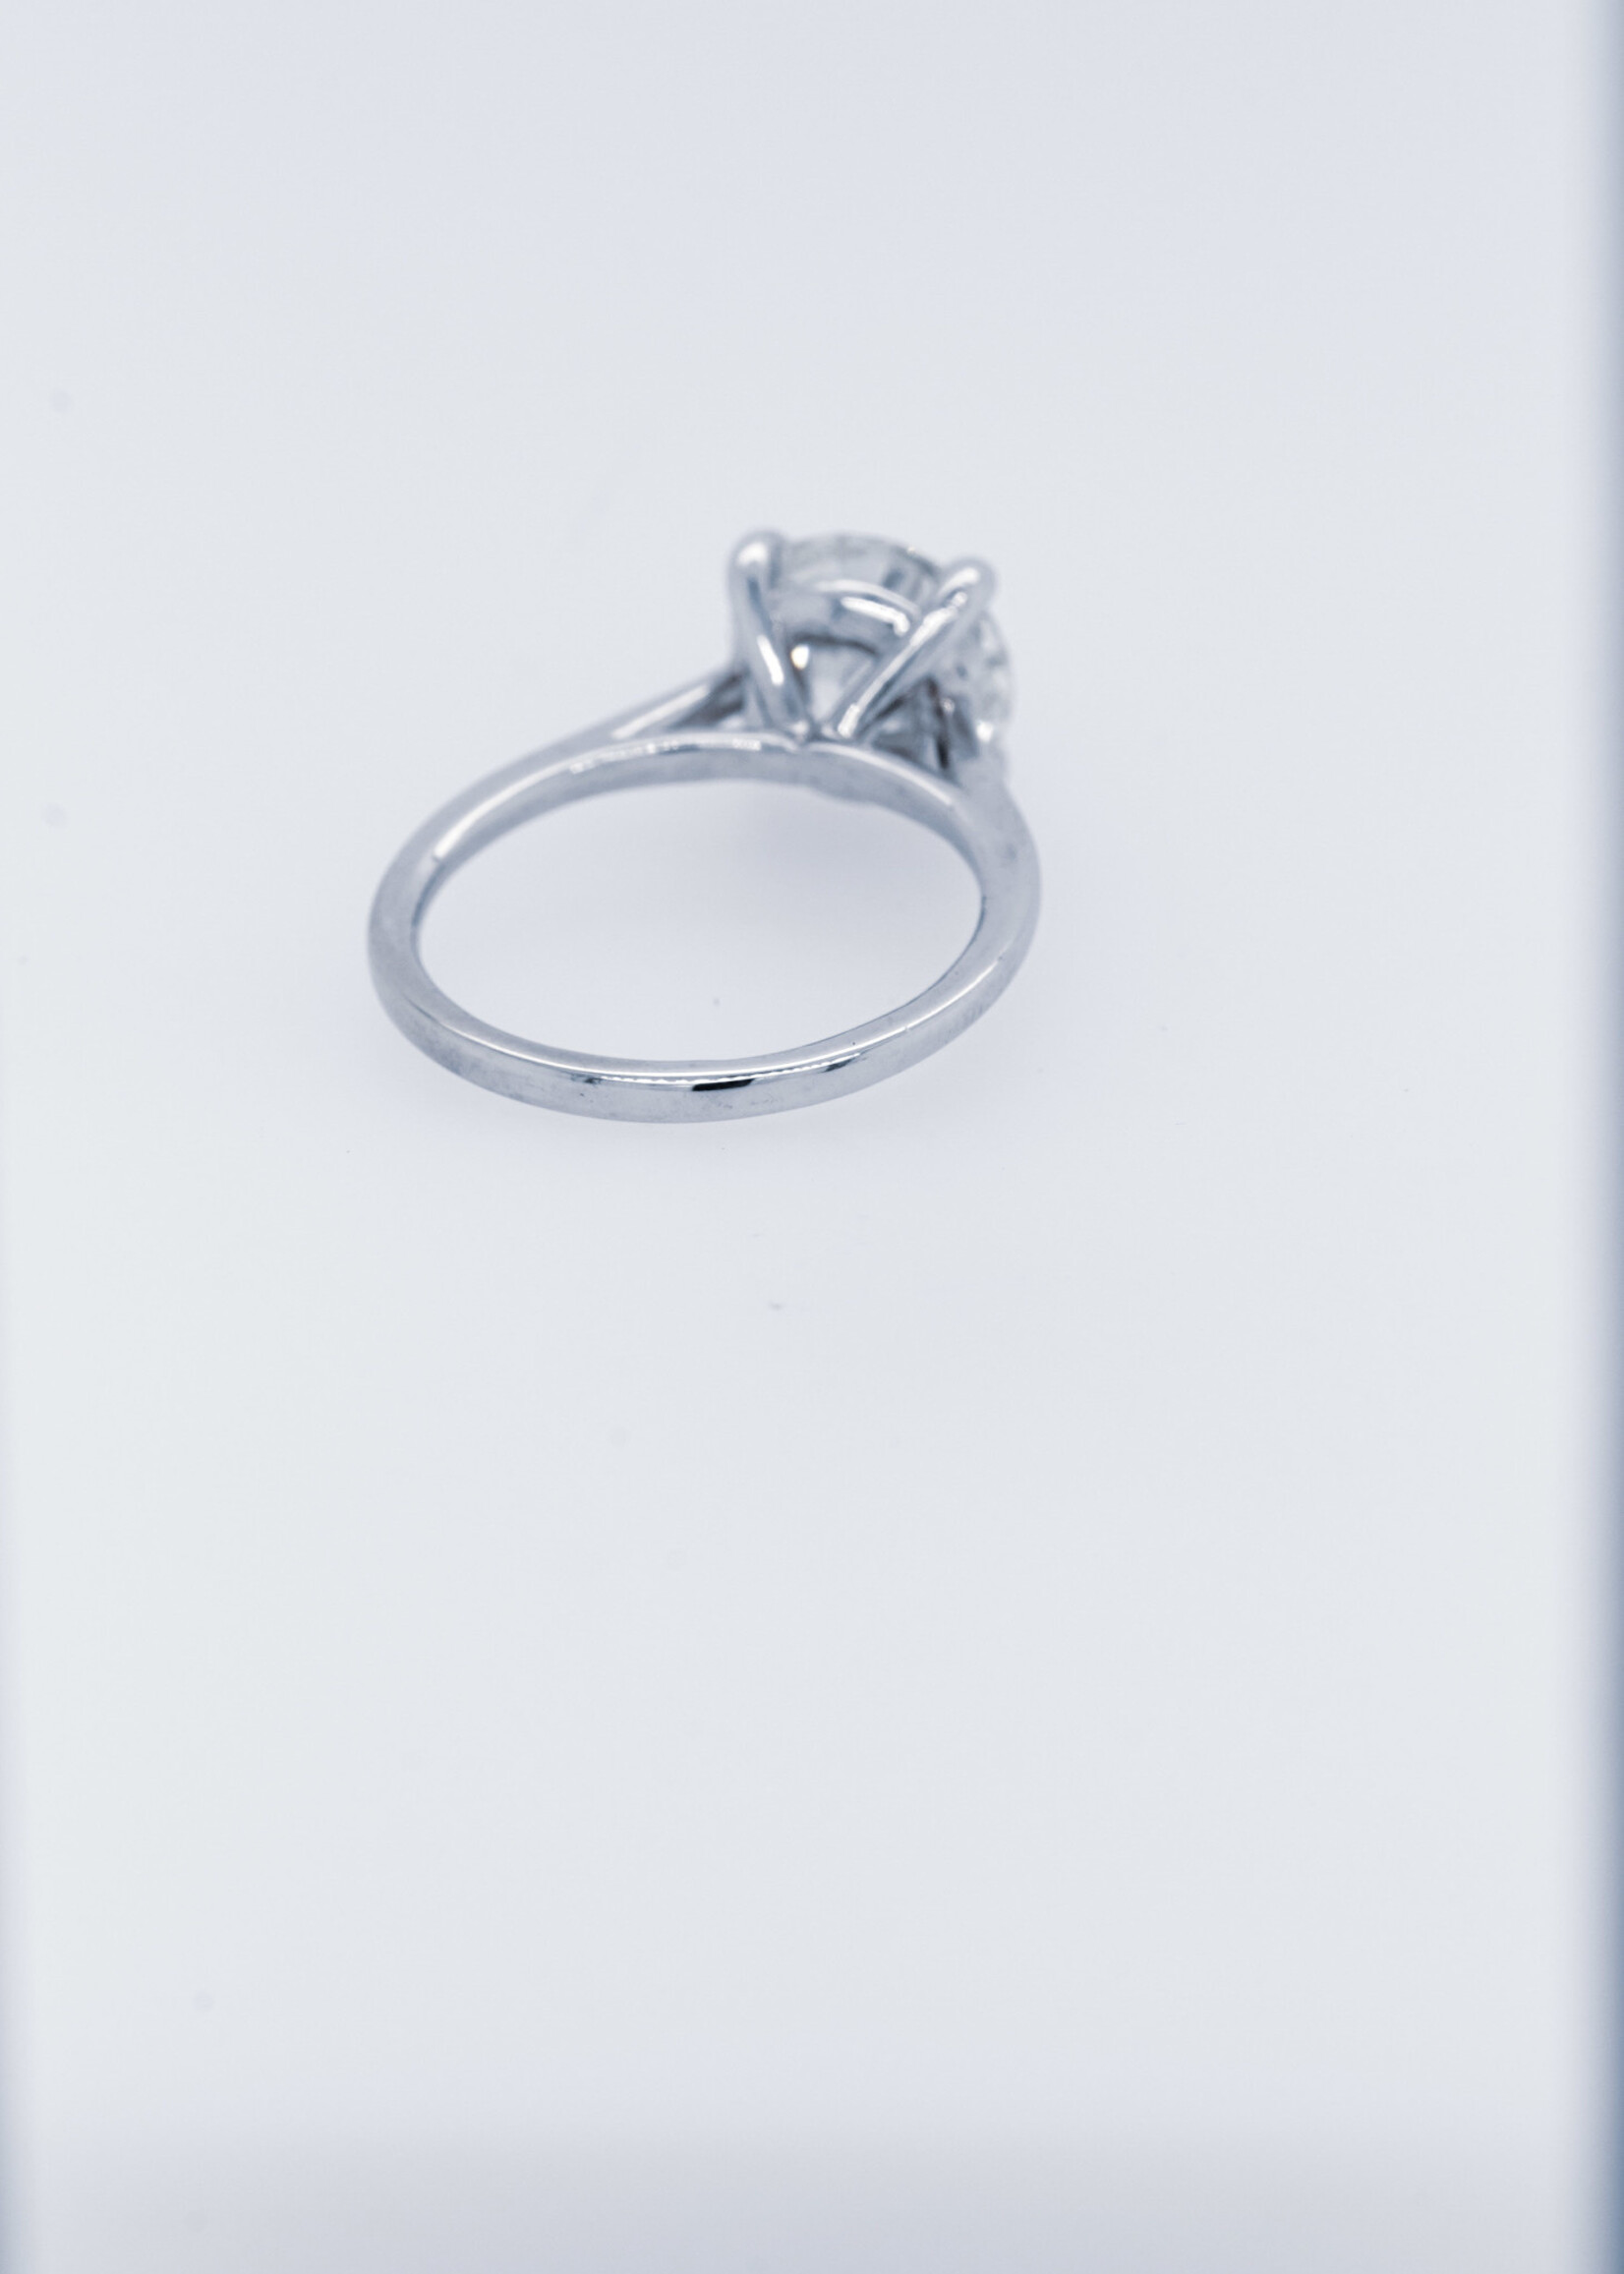 14KW 3.53g 3.03ct I/SI2 Round Diamond Solitaire Engagement Ring (size 6.5)